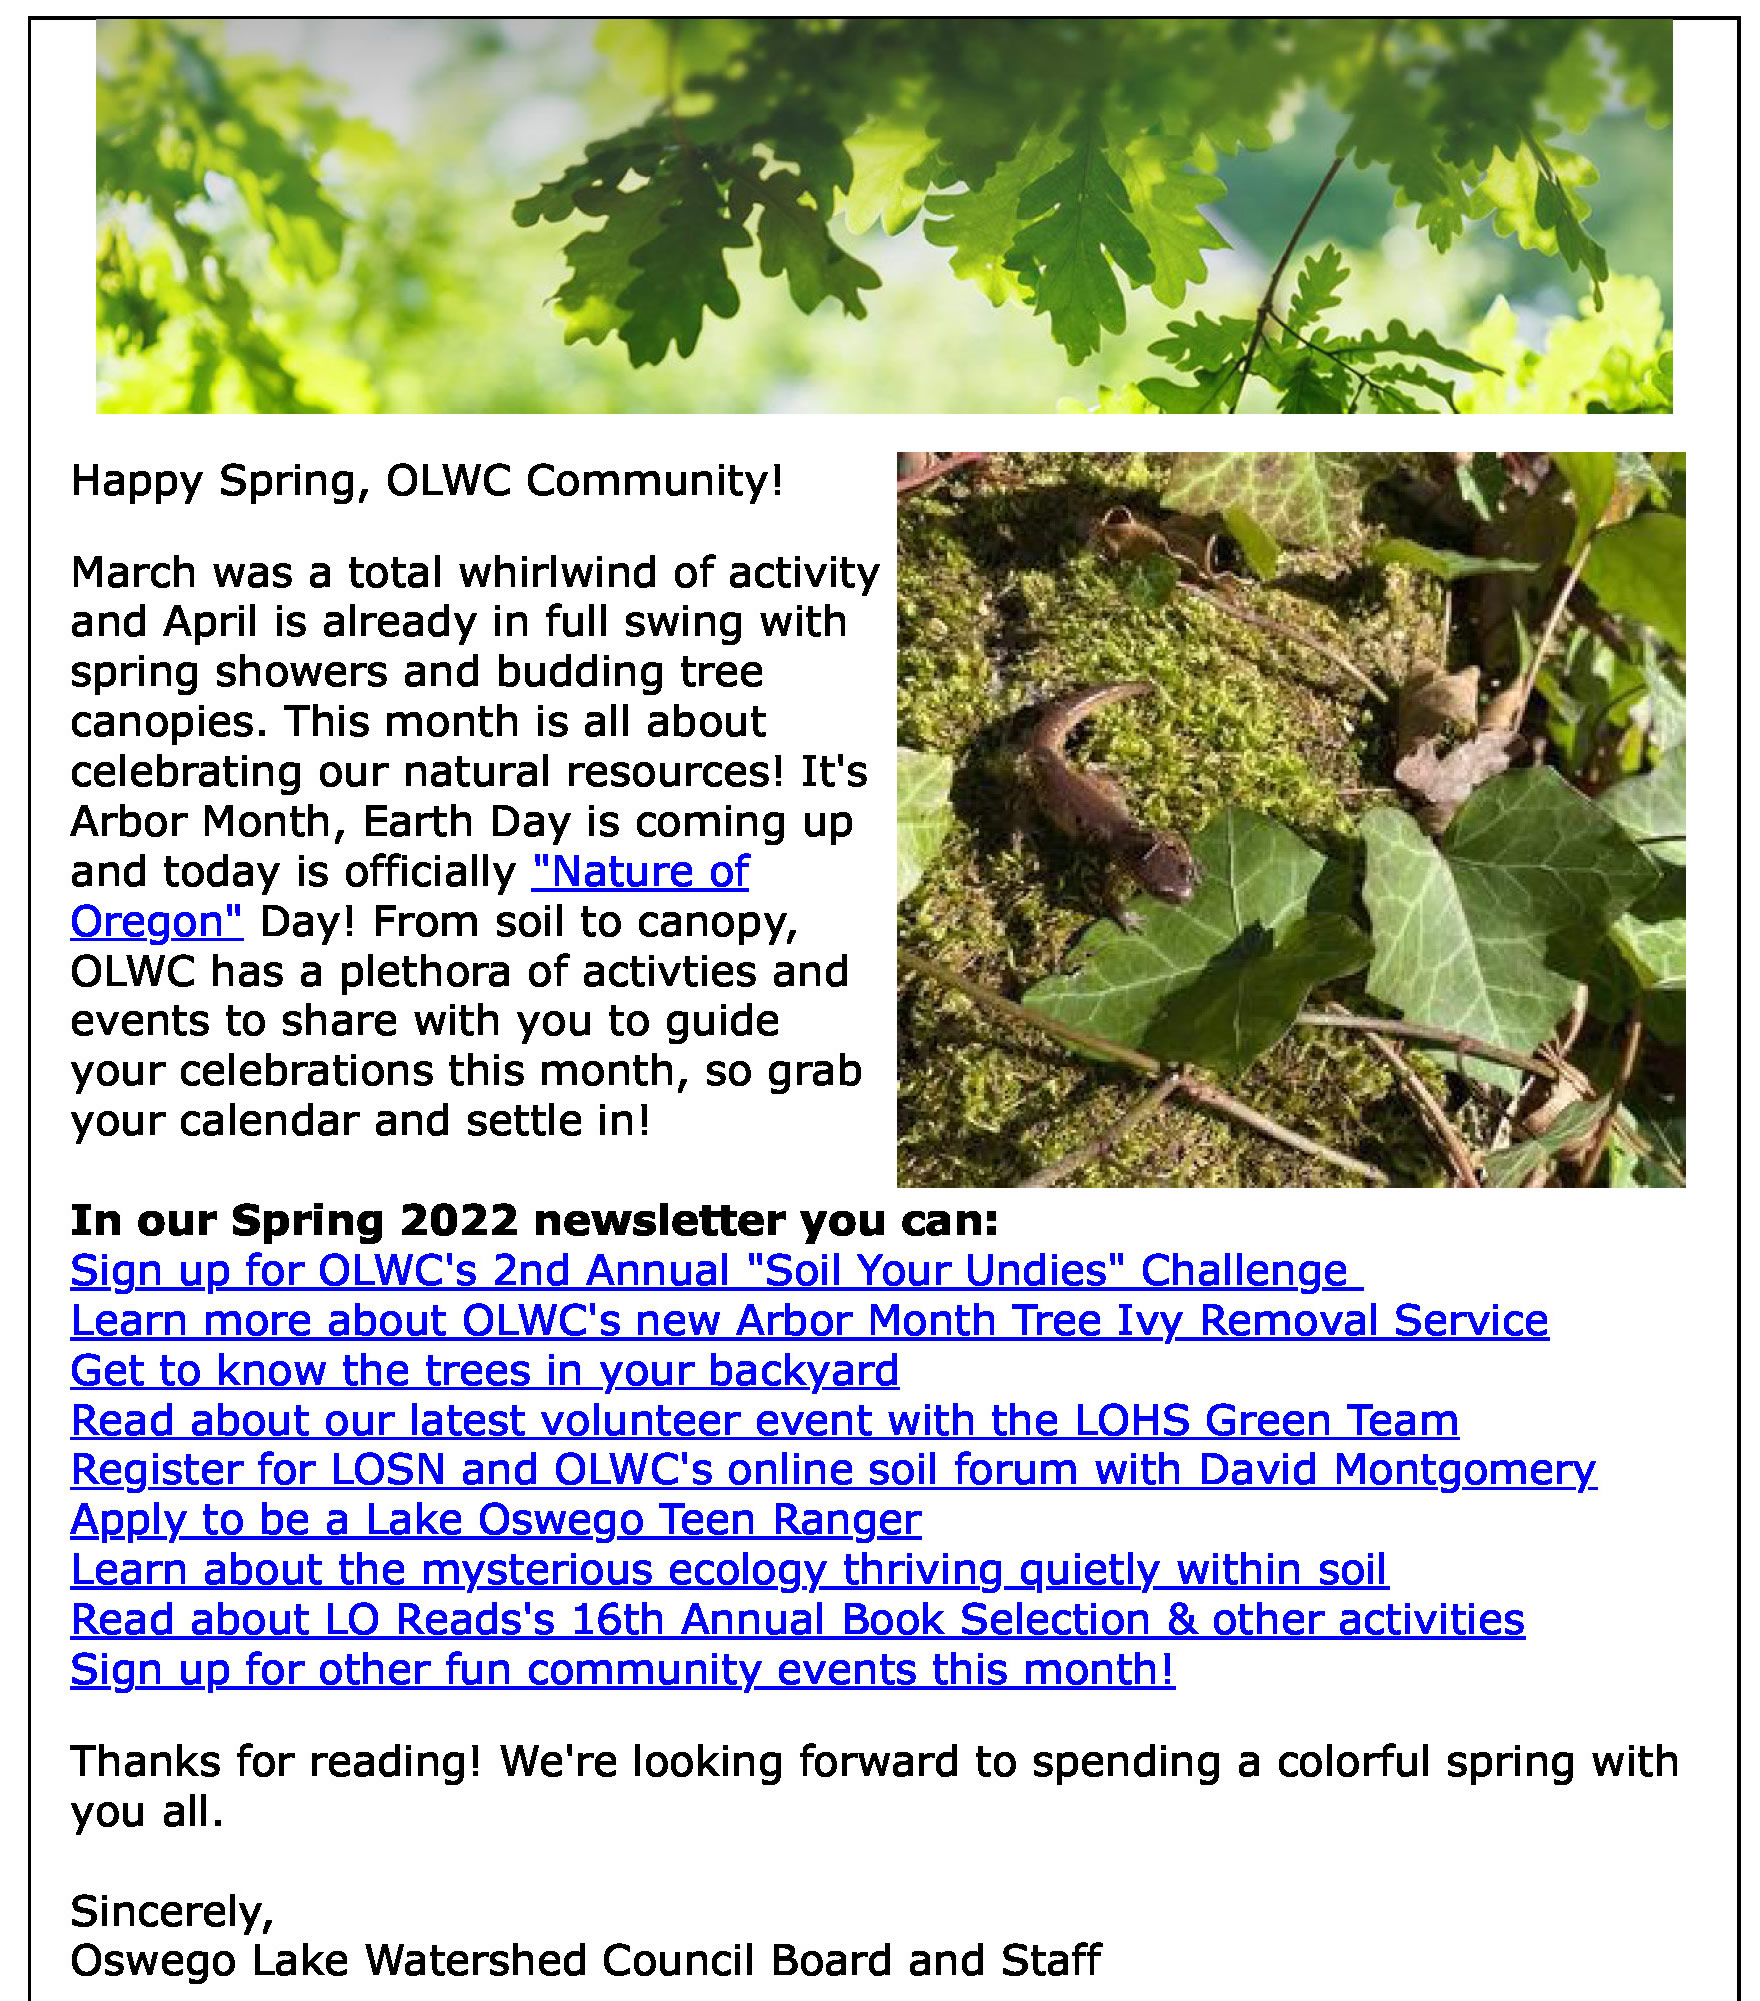 Top of the April 2022 Newsletter